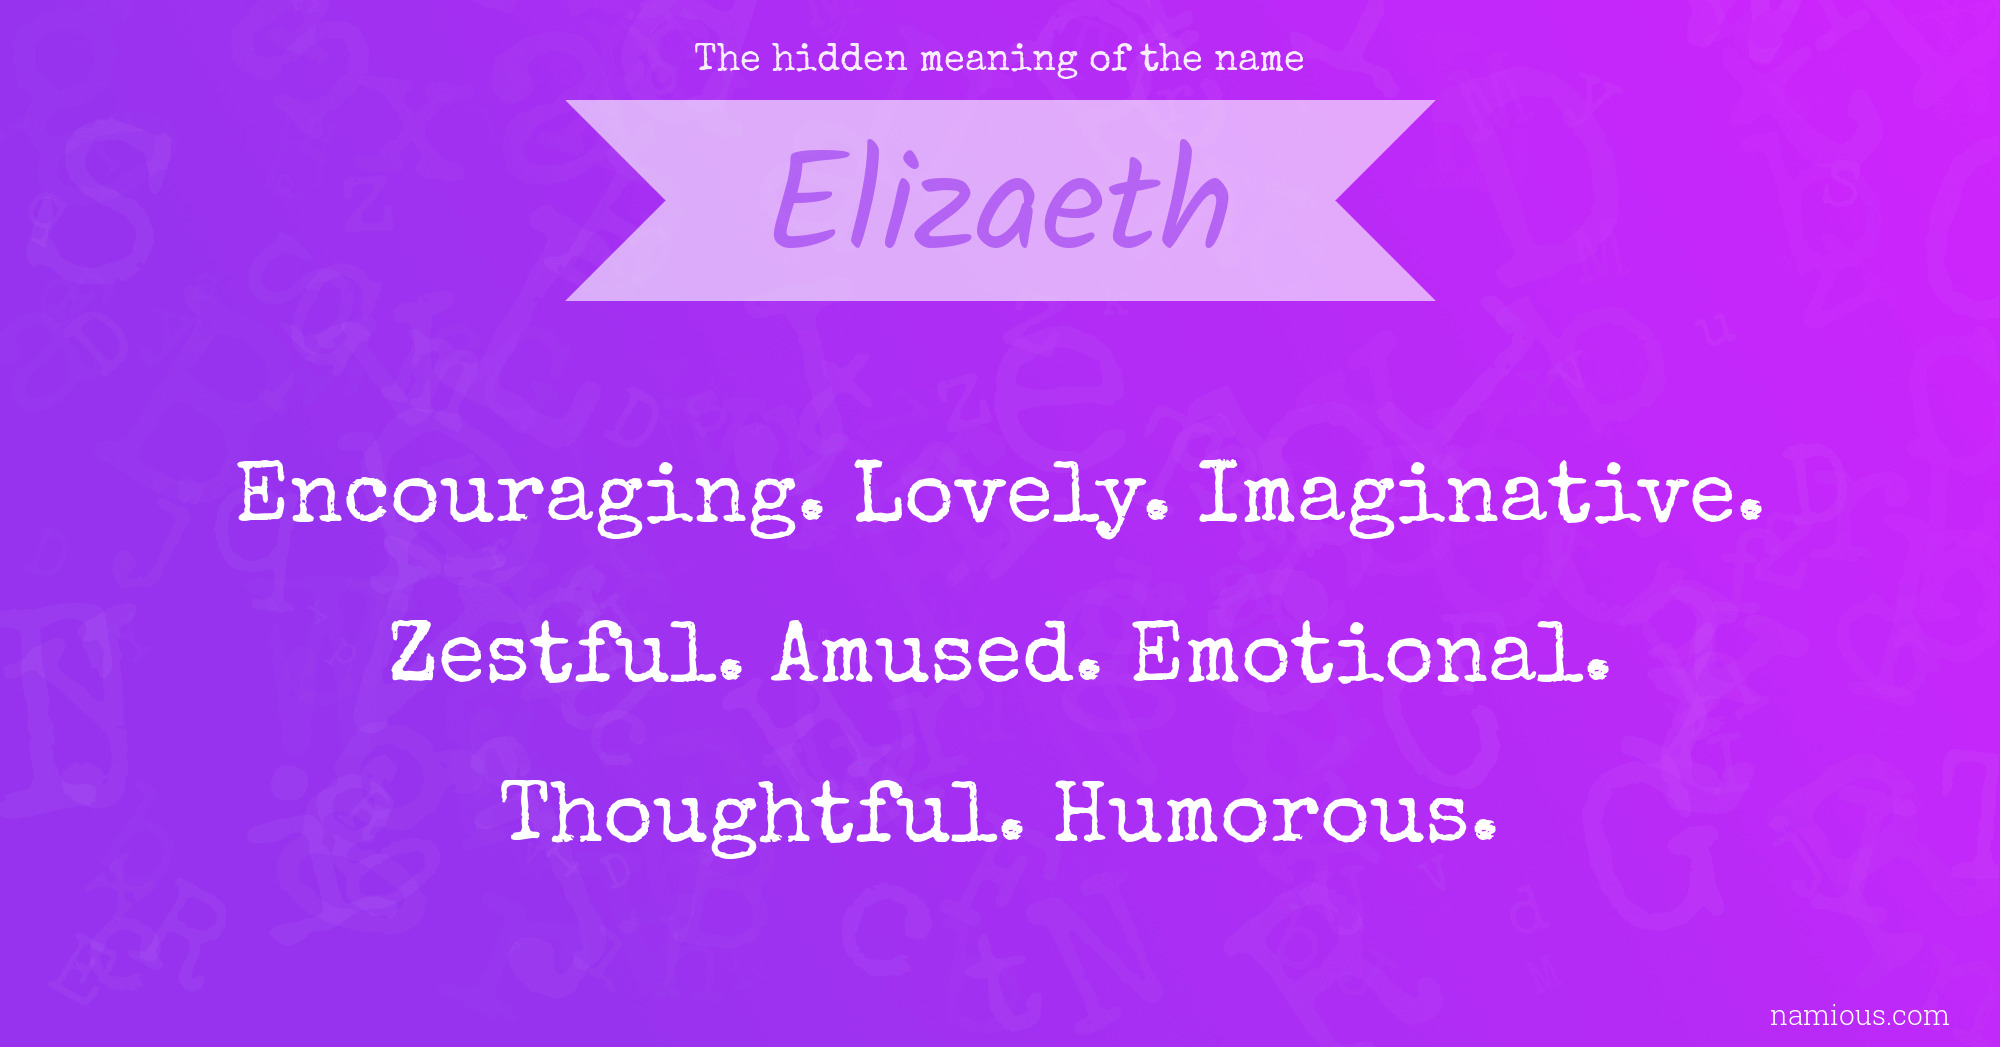 The hidden meaning of the name Elizaeth